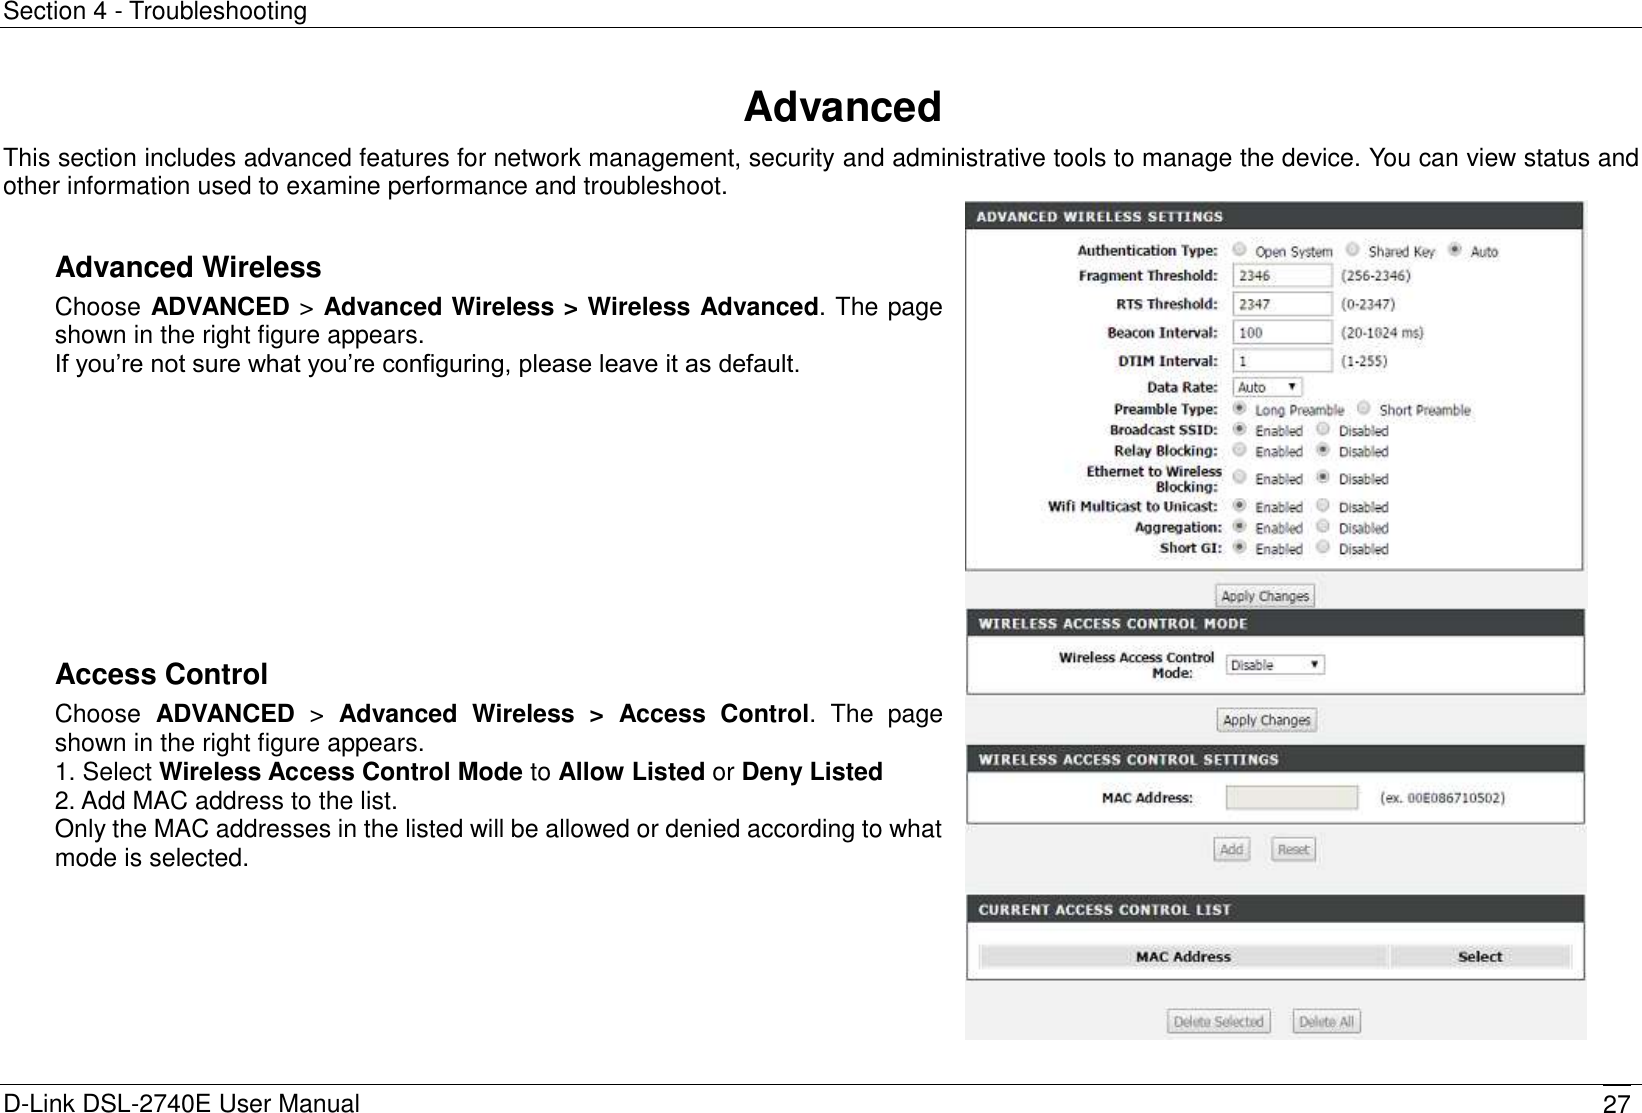 Section 4 - Troubleshooting D-Link DSL-2740E User Manual 27 Advanced This section includes advanced features for network management, security and administrative tools to manage the device. You can view status and other information used to examine performance and troubleshoot.  Advanced Wireless Choose ADVANCED &gt; Advanced Wireless &gt; Wireless Advanced. The page shown in the right figure appears.   If you’re not sure what you’re configuring, please leave it as default.          Access Control Choose  ADVANCED  &gt;  Advanced  Wireless  &gt;  Access  Control. The  page shown in the right figure appears.   1. Select Wireless Access Control Mode to Allow Listed or Deny Listed 2. Add MAC address to the list. Only the MAC addresses in the listed will be allowed or denied according to what mode is selected.   